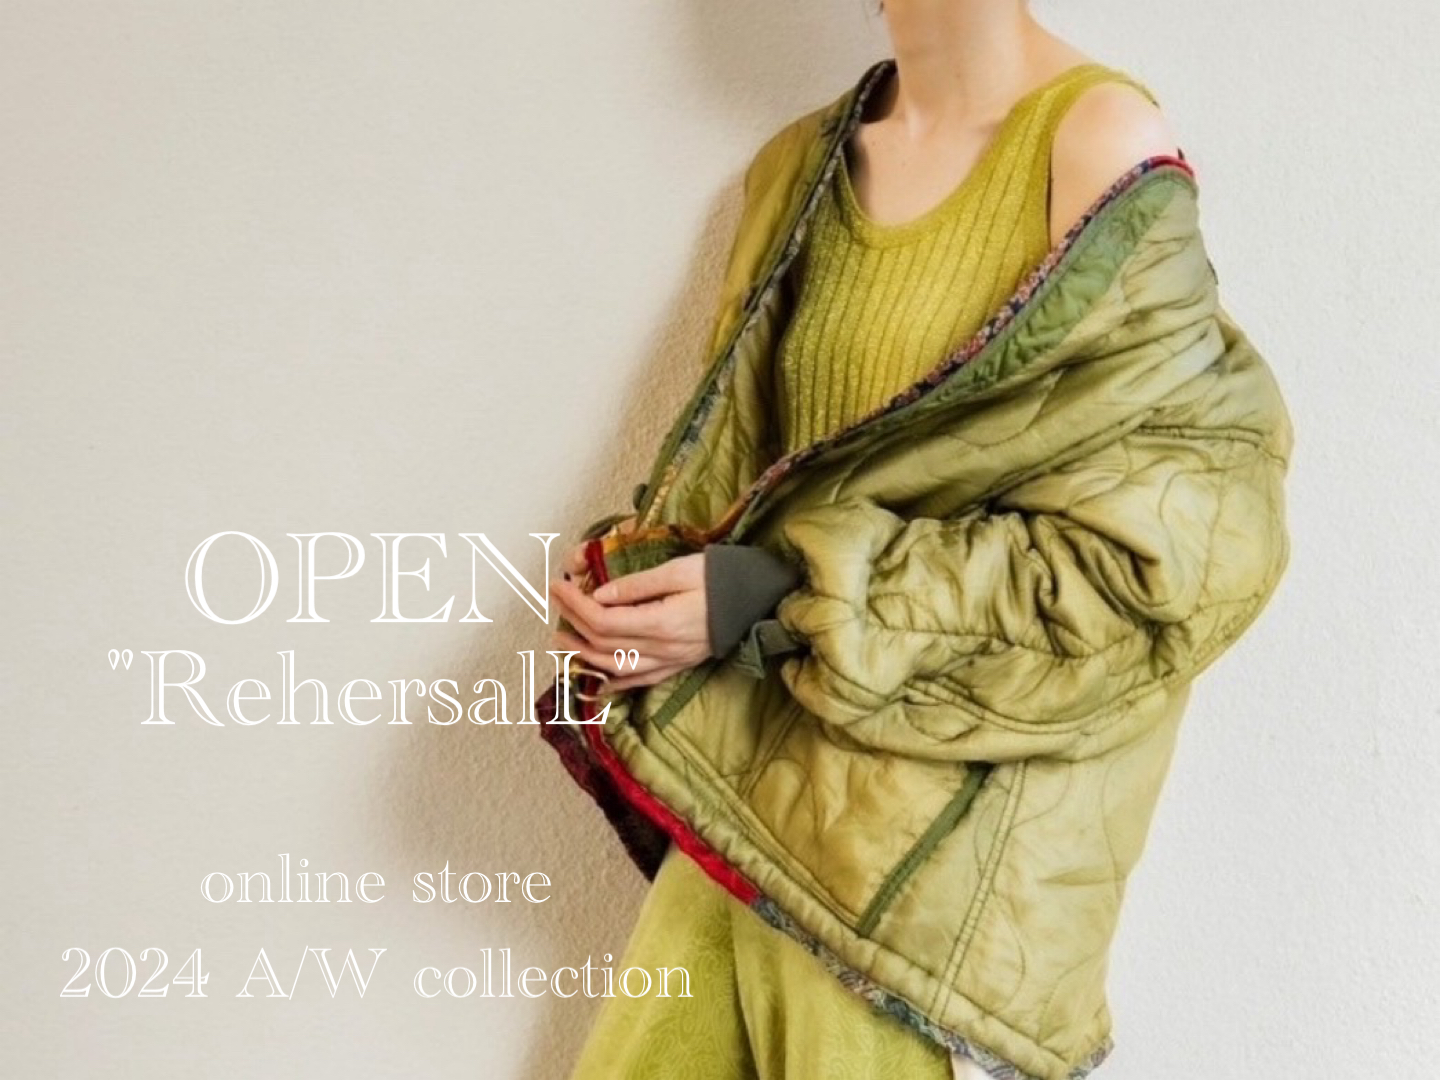 "RehersalL" 2024 A/W collection オーダー受付スタート！